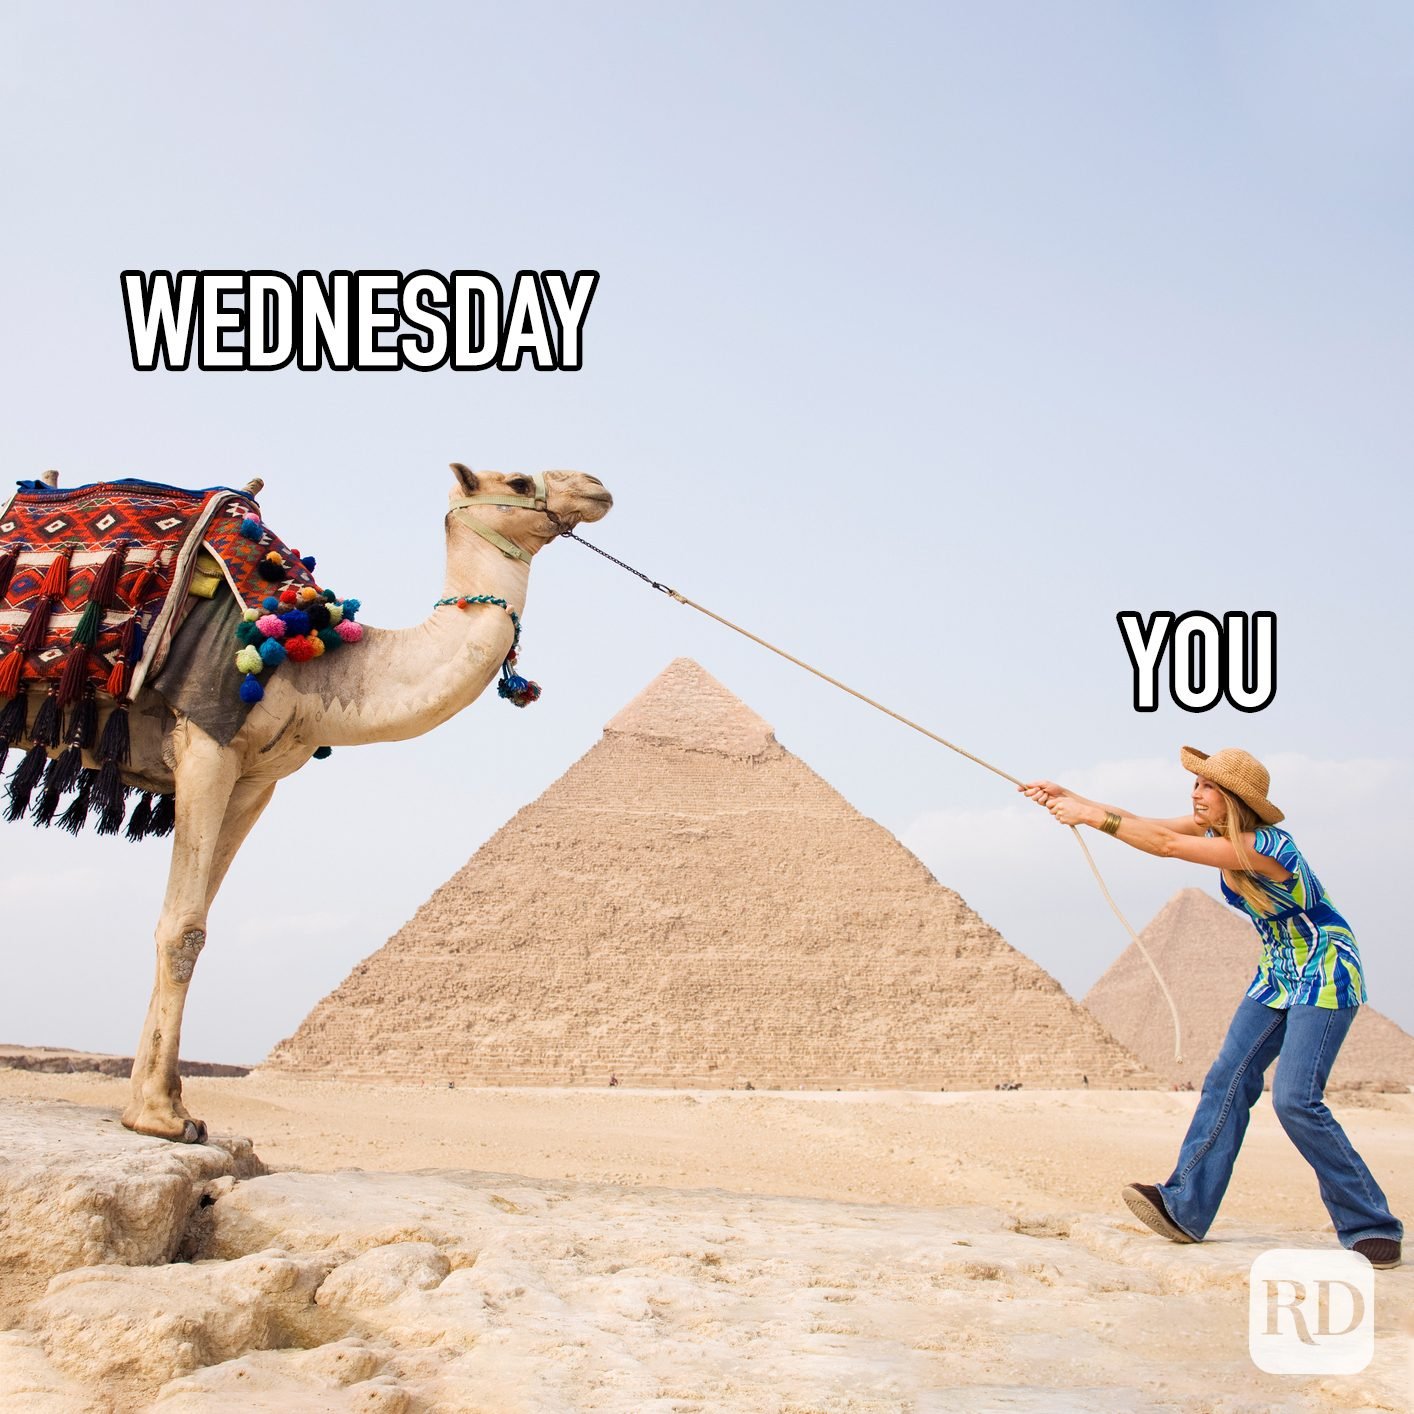 Wednesday Vs You meme text over image of woman pulling a camel on a lead